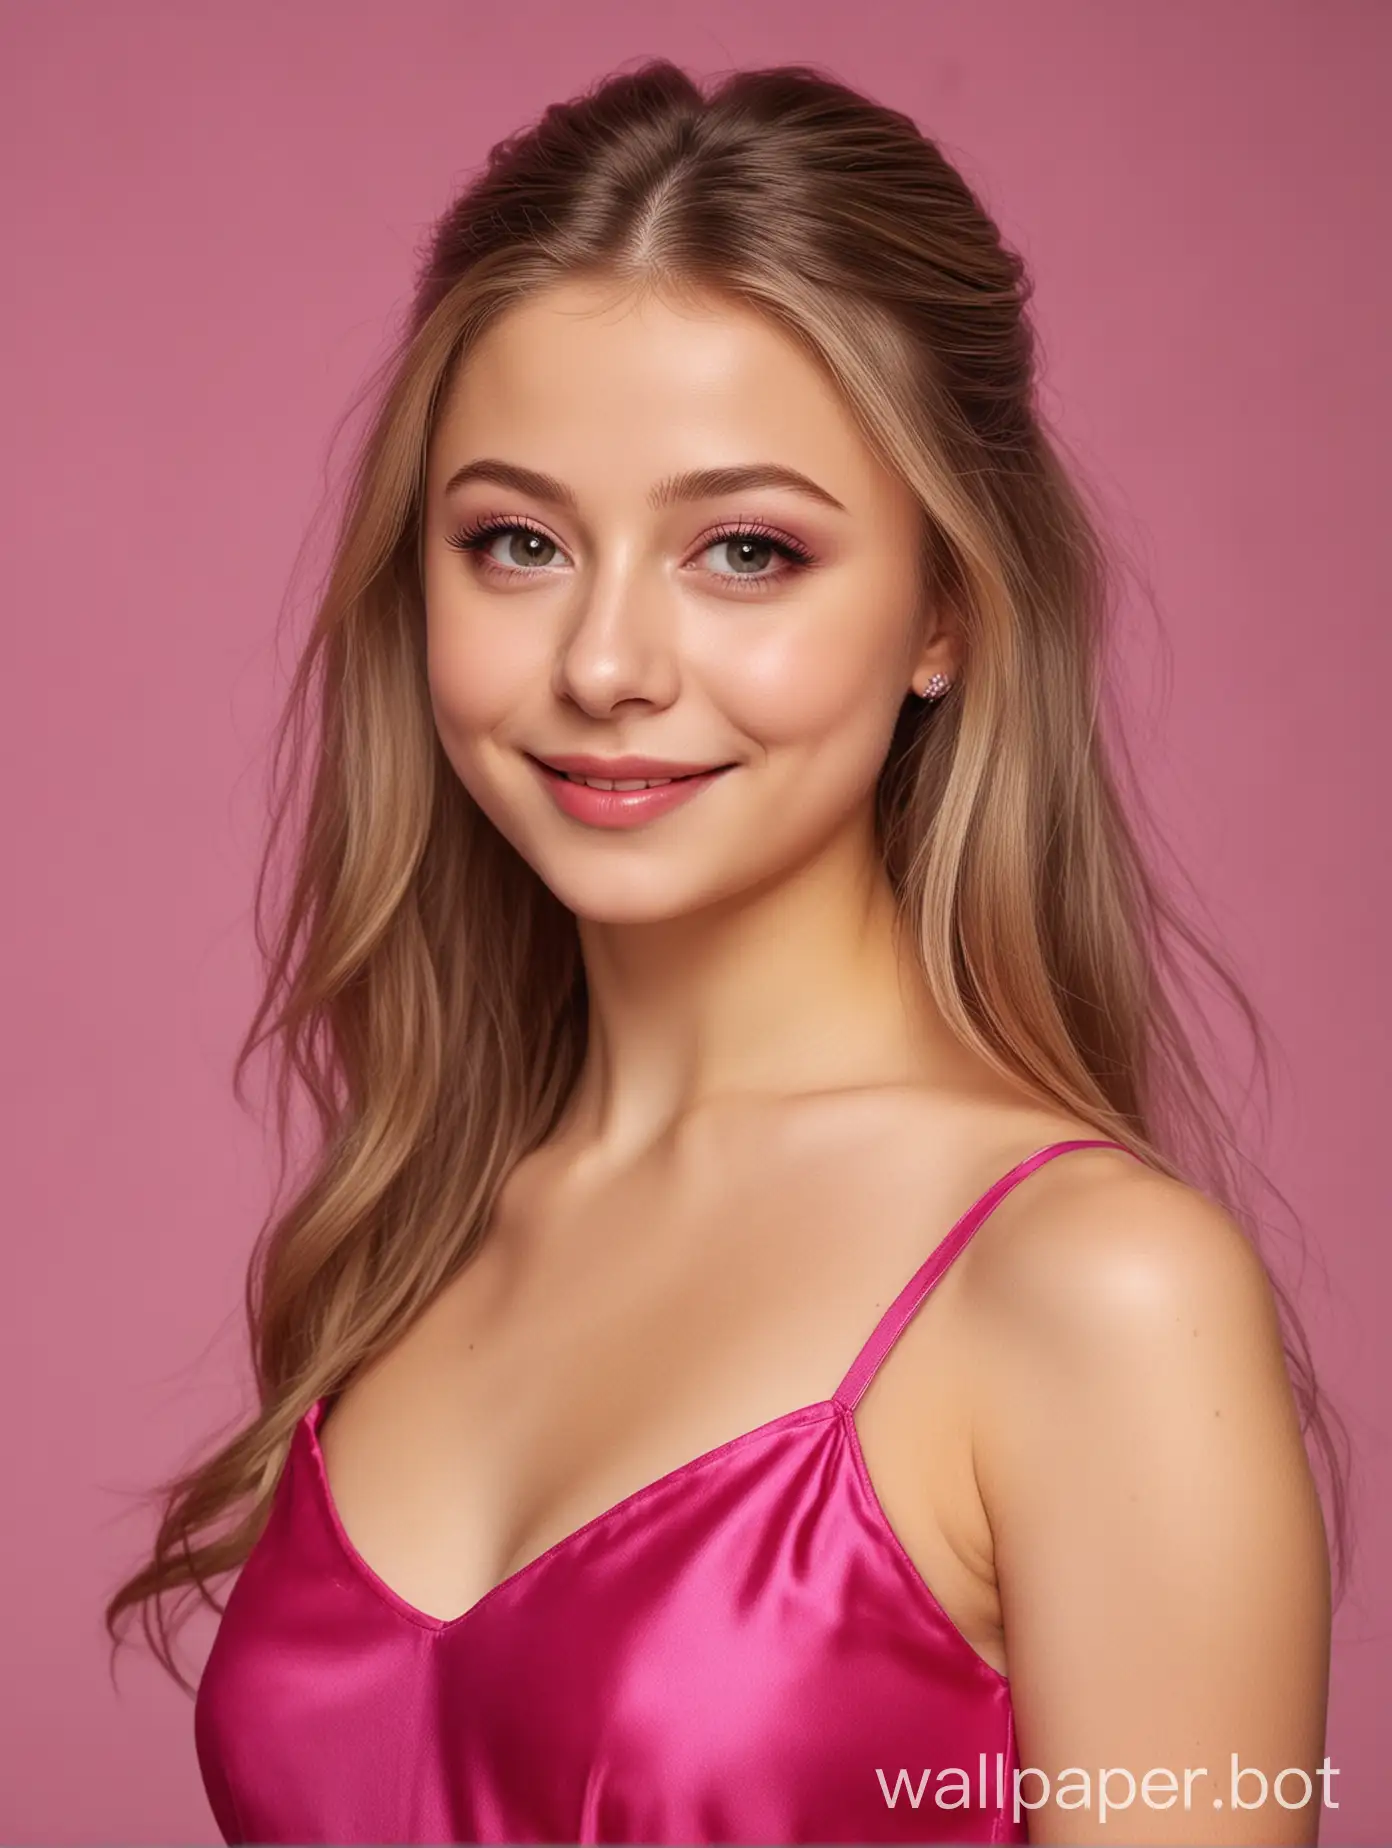 Yulia Lipnitskaya with soft facial features, with long straight silky hair in a pink fuchsia silk slip dress, smiles beautifully